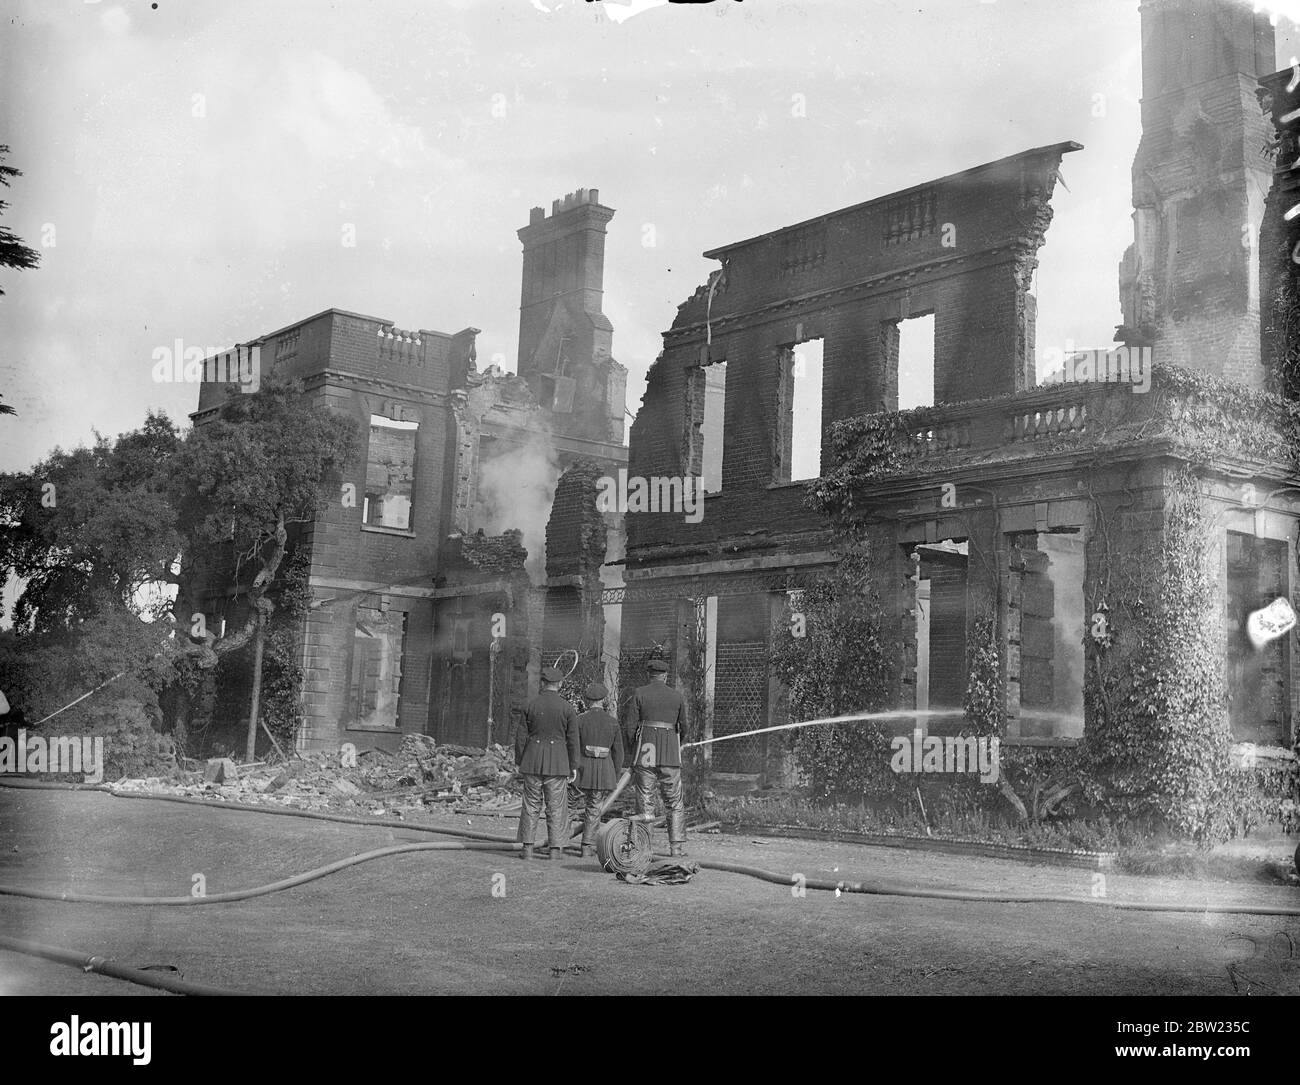 250-year-old Bedfordshire mentioned destroyed by mystery fire. Police enquiries about motorist. A 250 year old unoccupied 60 room mansion, Ickwell Bury, near Biggleswade, Bedfordshire, was destroyed by fire, which lit up the whole countryside. Fireman from three towns for the flames are several hours. Following the fire, police are making enquiries concerning a motorcar which a girl from Ickwell villages, says she saw leaving the mansion just before the outbreak. The house, which is owned by Mr R T Les, of Farnham, had been used for the past 20 years as a preparatory school. It had a magnifice Stock Photo